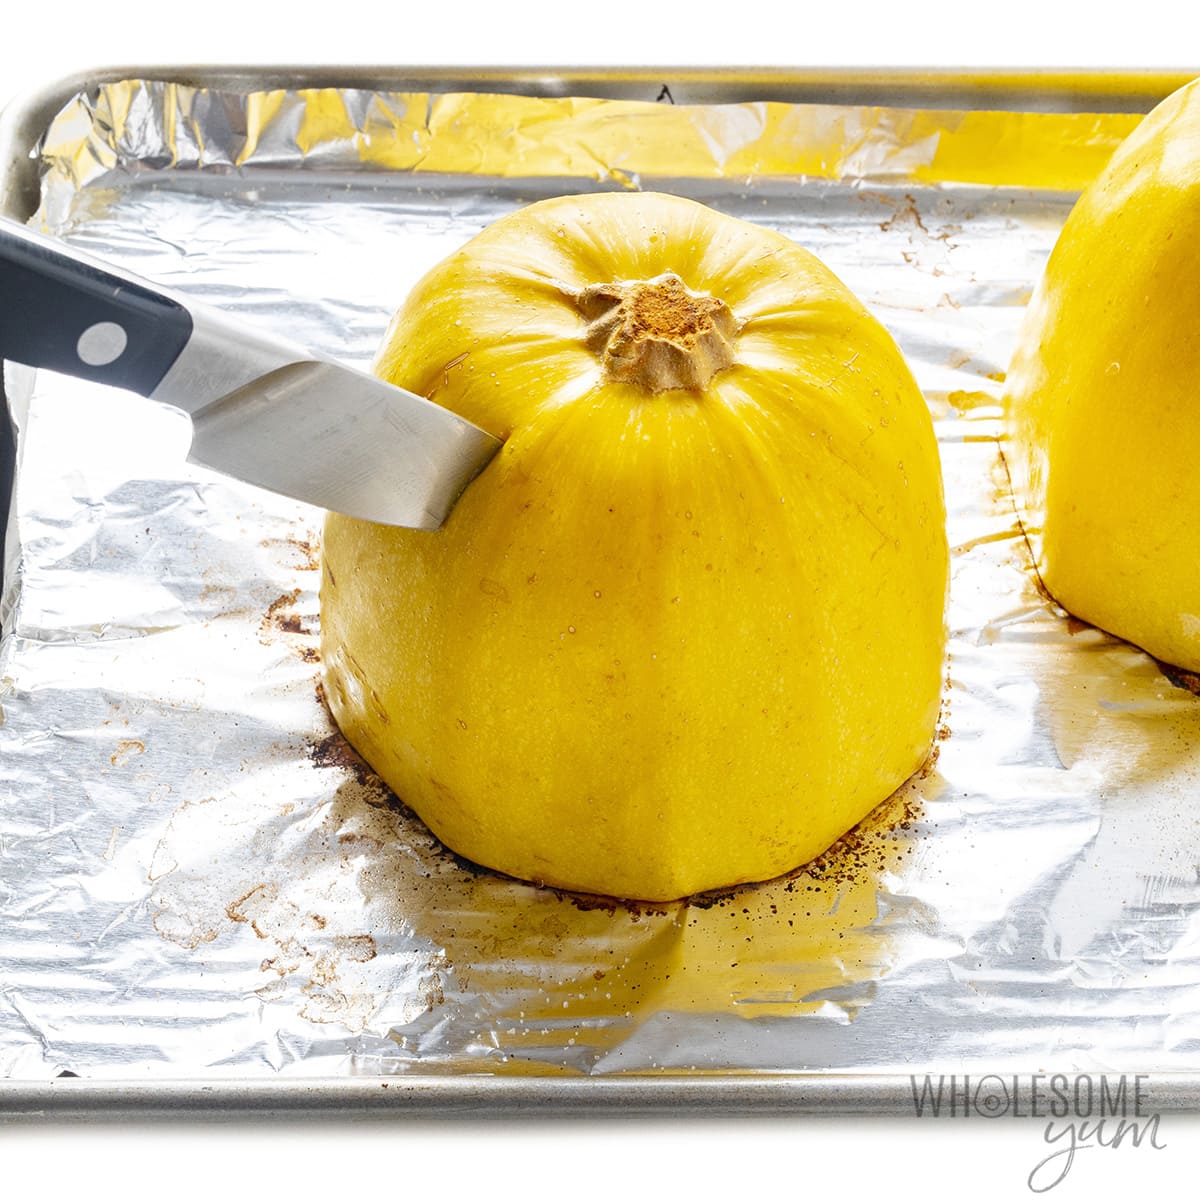 Halved squash with knife inserted.